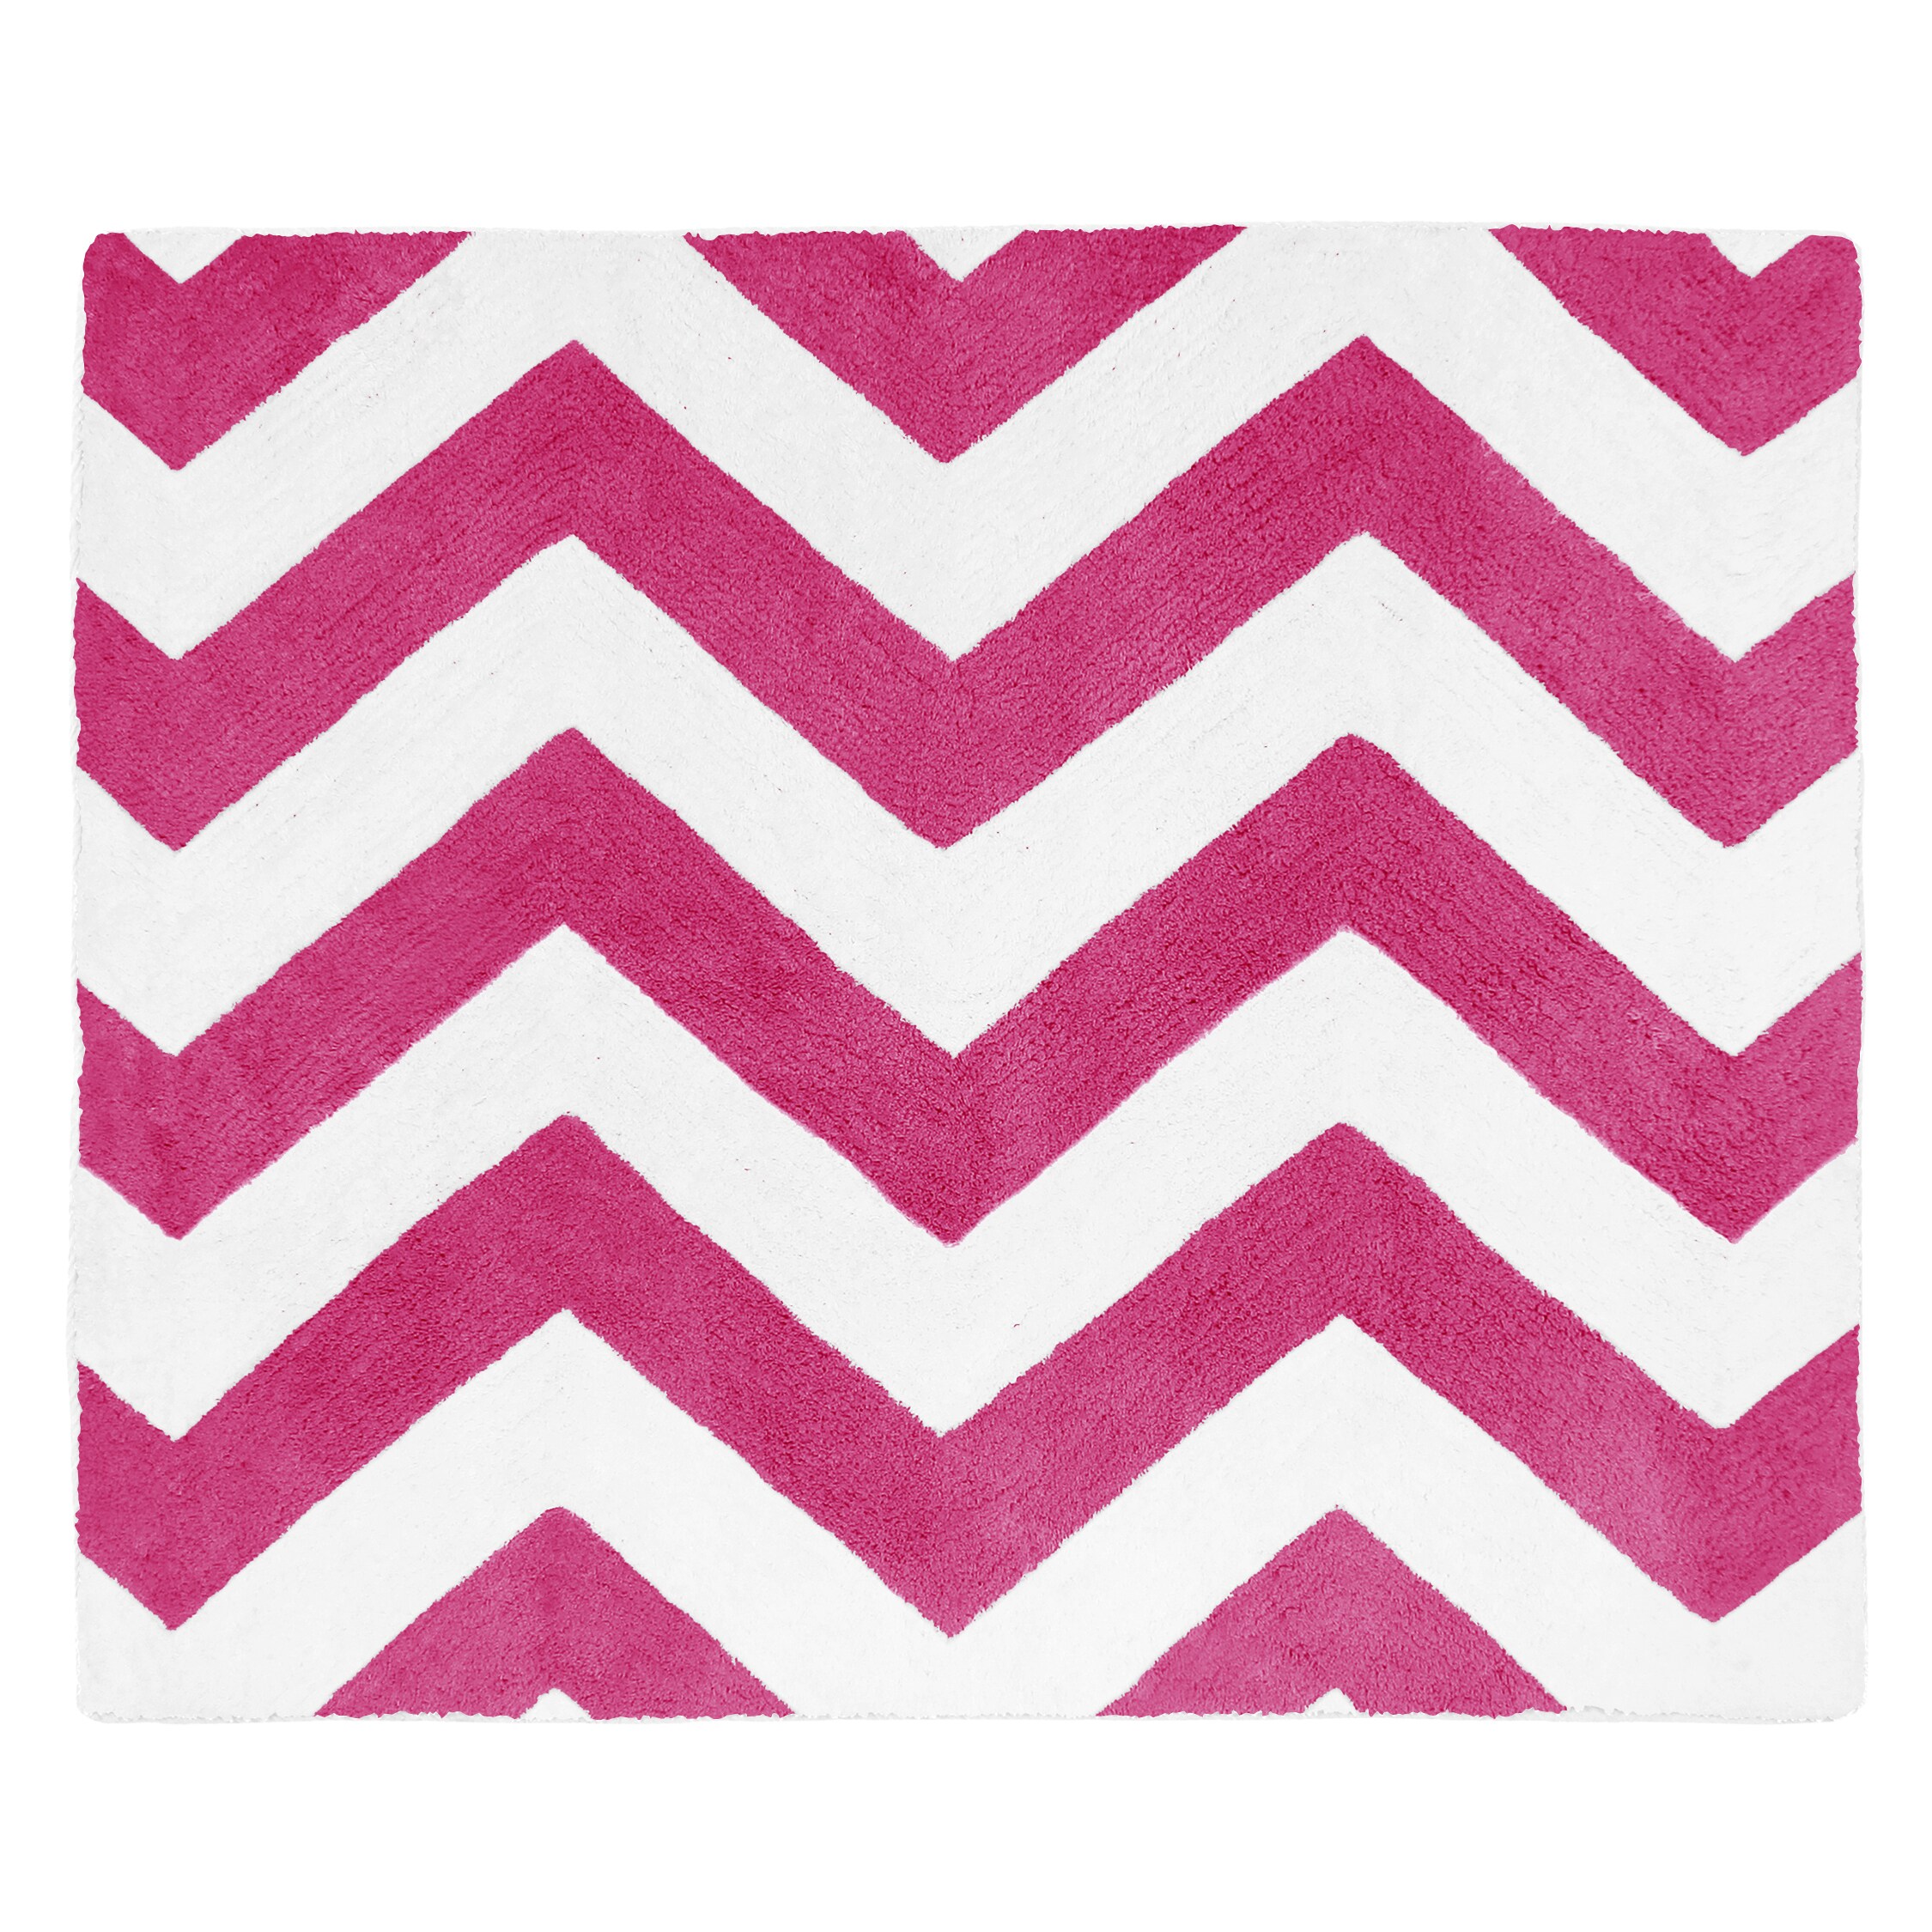 Sweet Jojo Designs Hot Pink/ White Chevron Floor Rug (Pink/ whiteDimensions 30 inches x 36 inchesCoordinates with the Sweet Jojo Designs Bedding CollectionMaterial 100 percent cottonCare instructions Spot clean as neededAll rug sizes are approximate. D